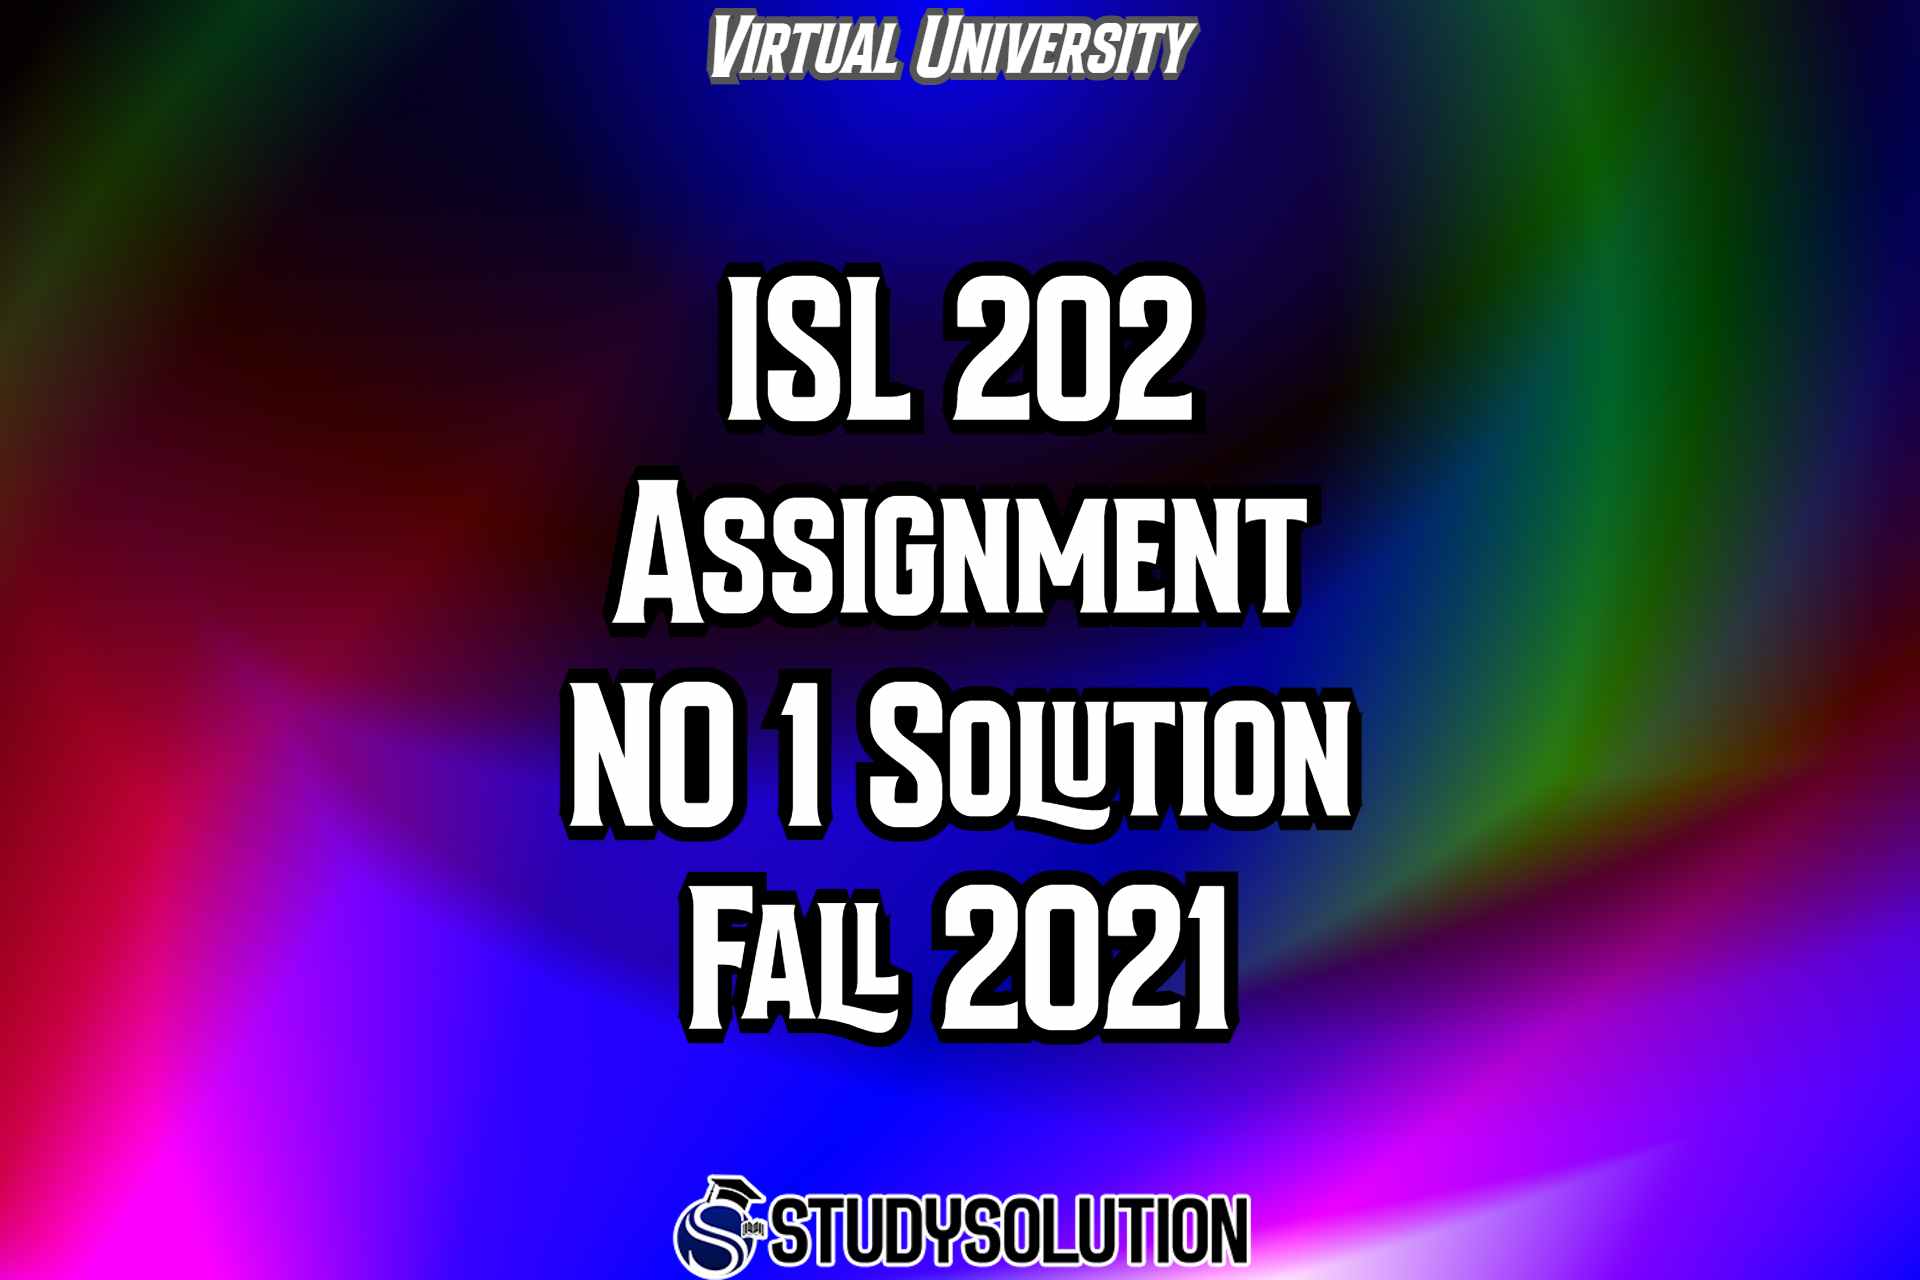 ISL202 Assignment NO 1 Solution Fall 2021